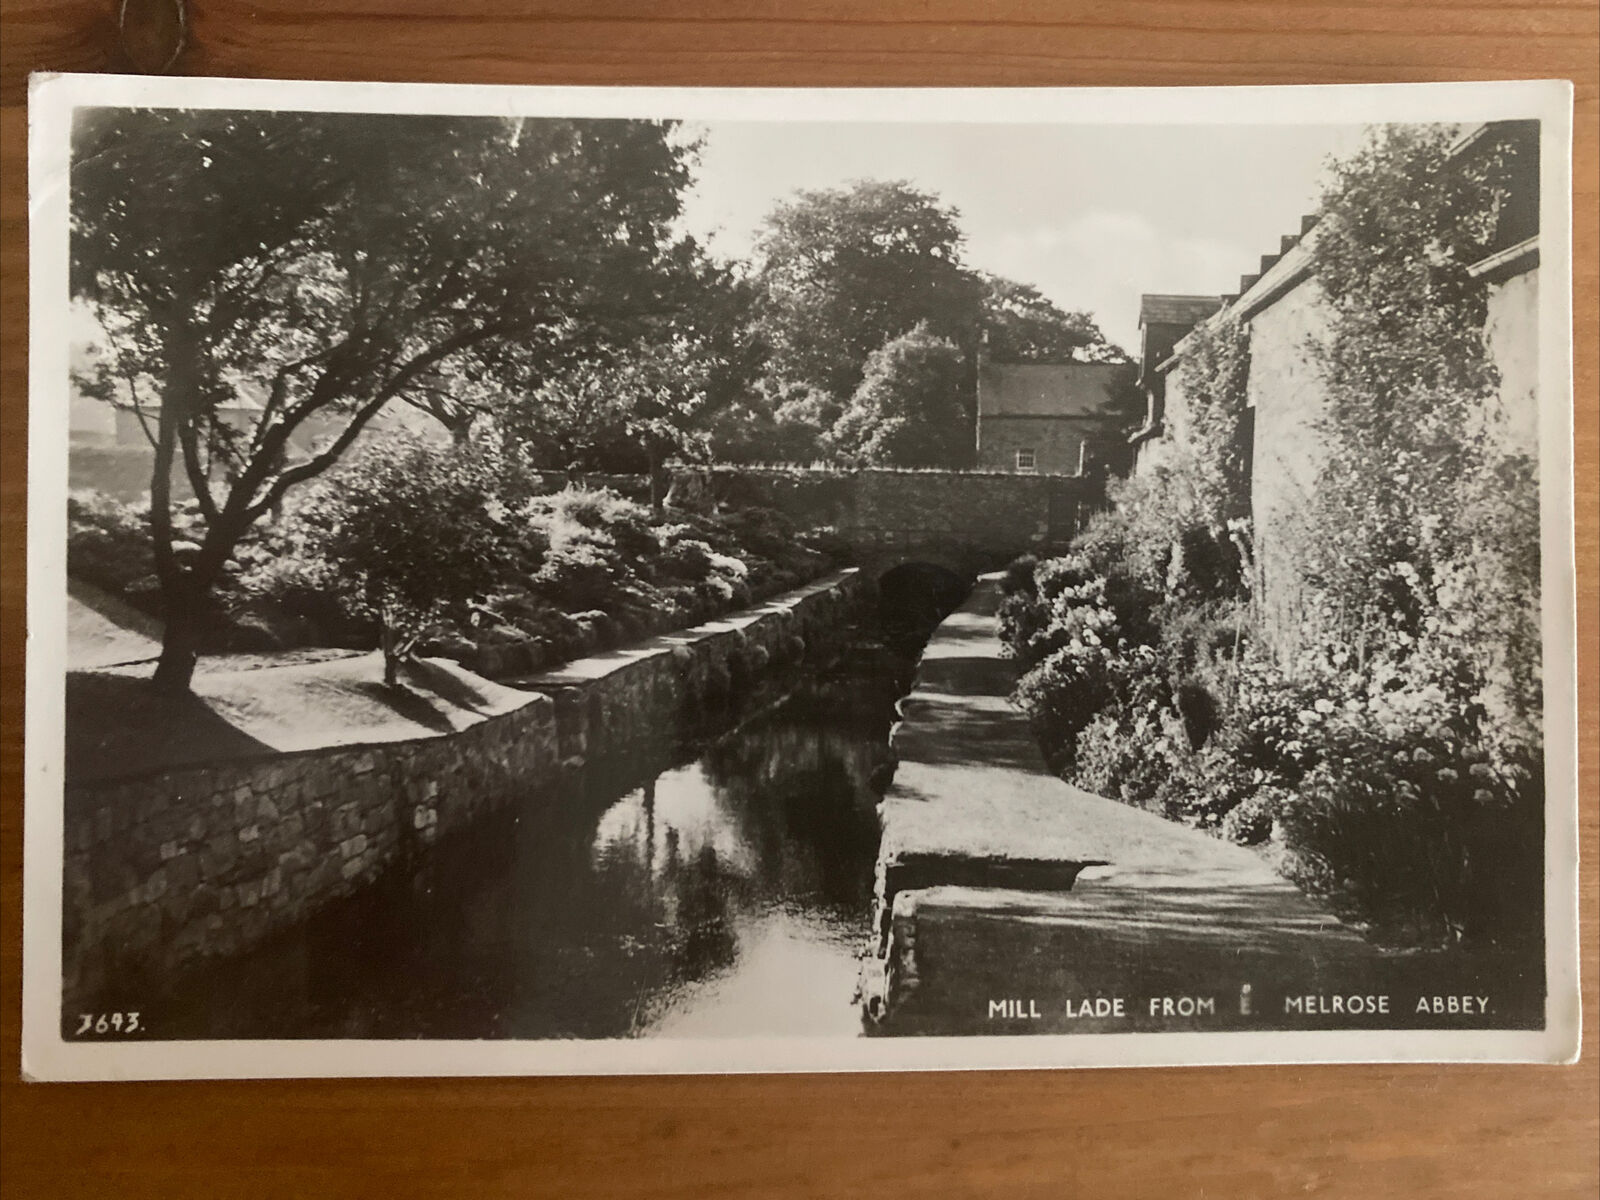 House Clearance - Mill Lade from E. Melrose Abbey. Lilywhite. 1957 RP Edwards Selkirk